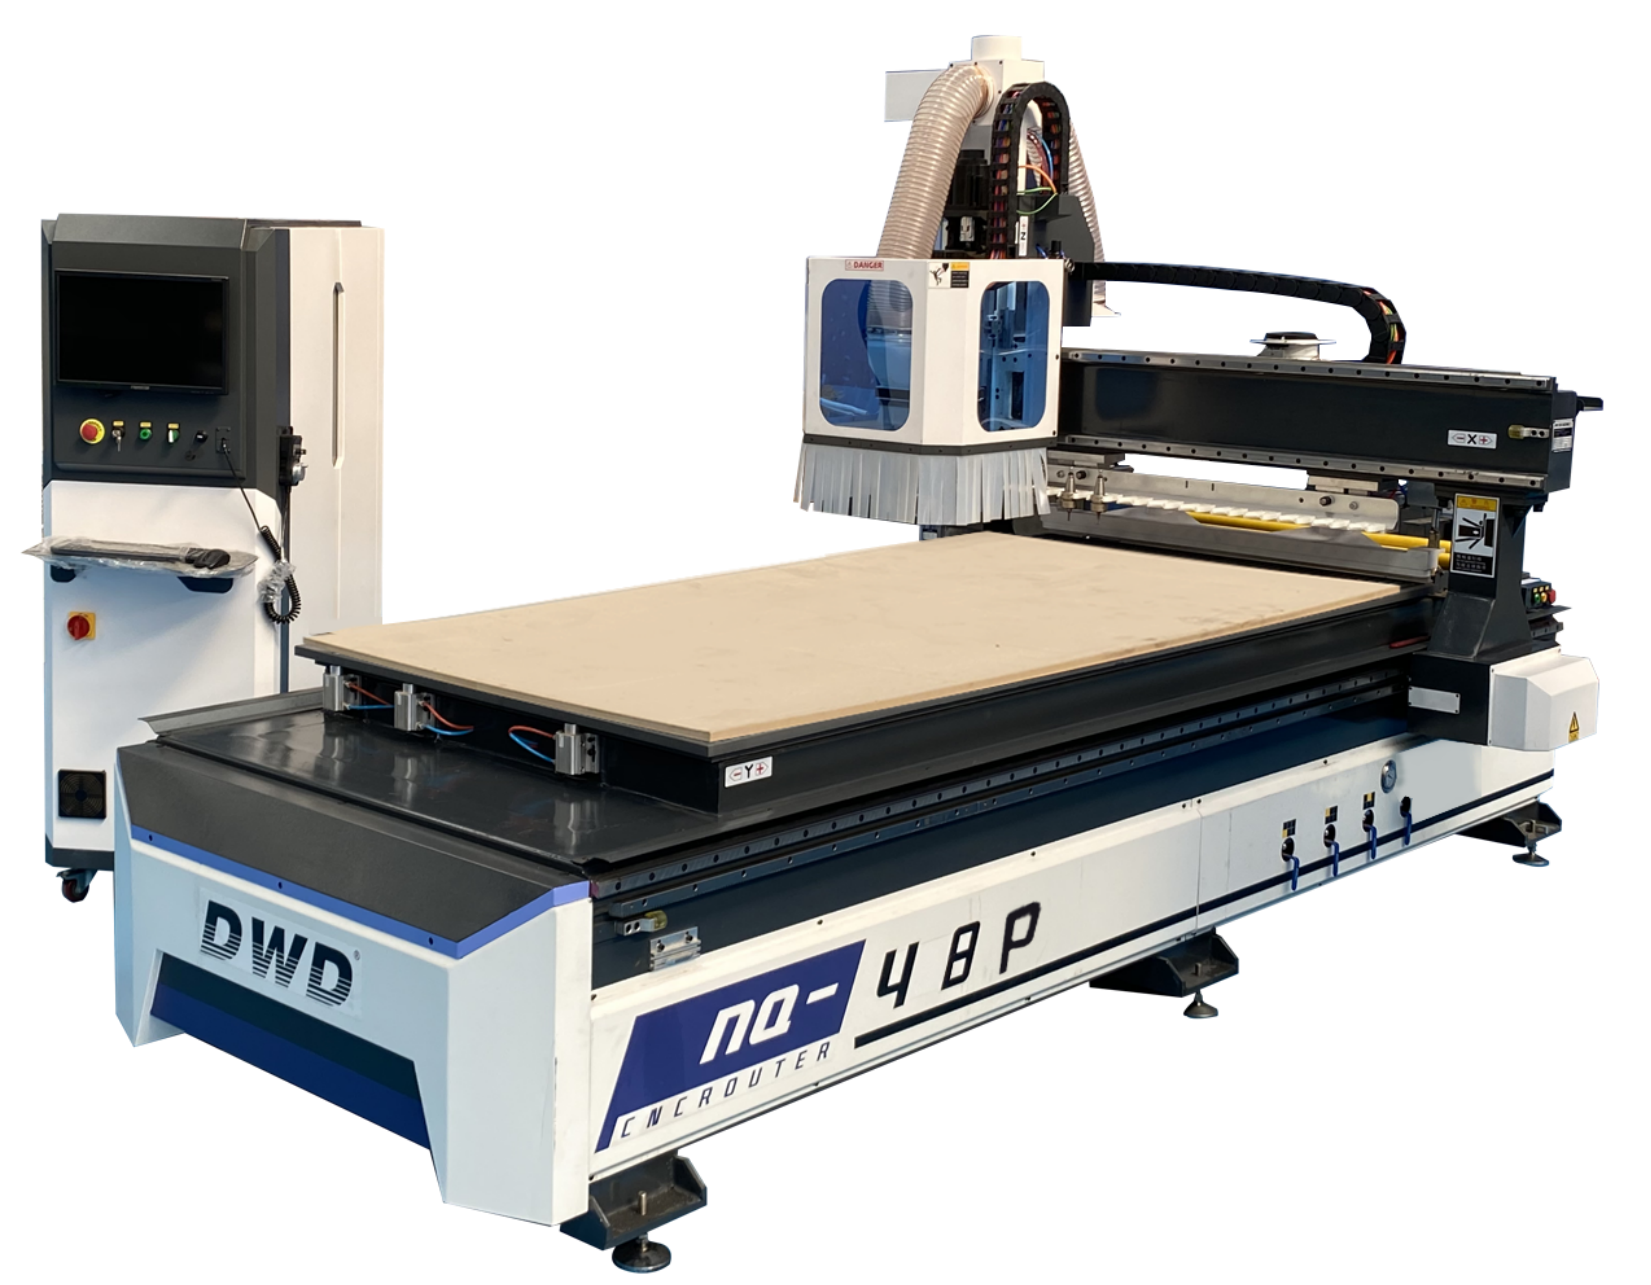 Where can NESTING CNC machines be used?